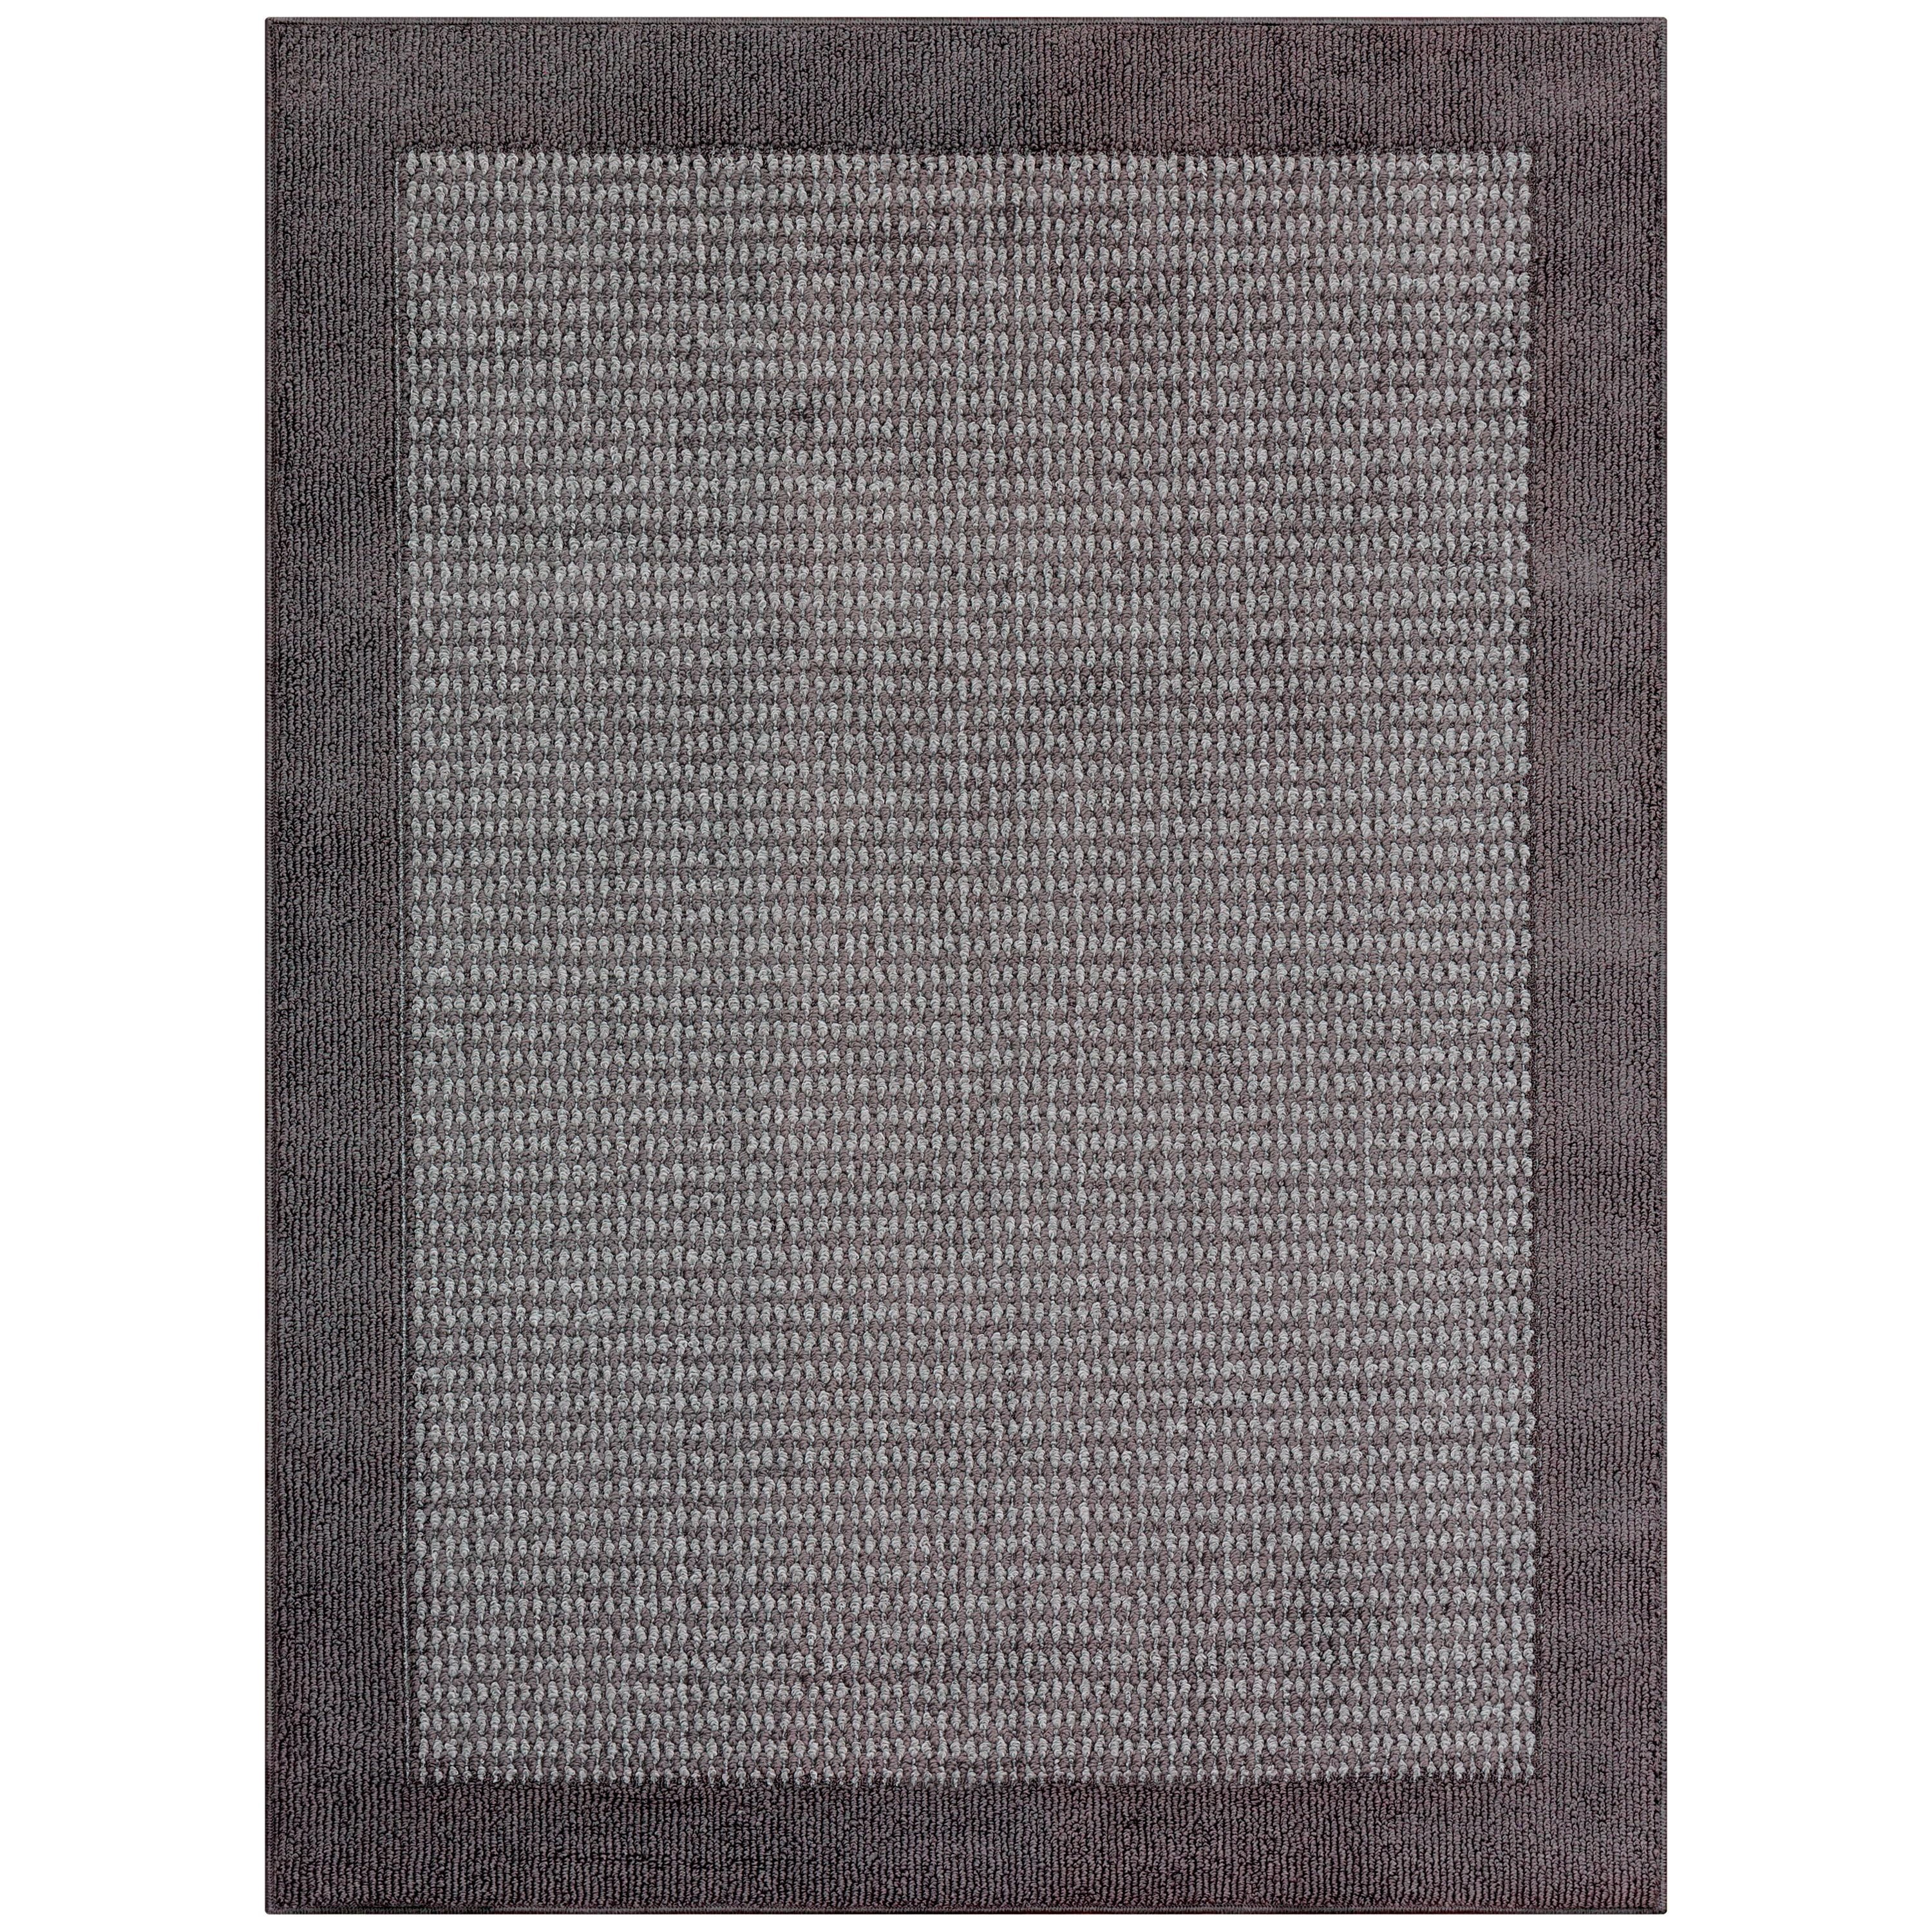 Mainstays Traditional Faux Sisal Border Gray Area Rug, 4'x5'4"